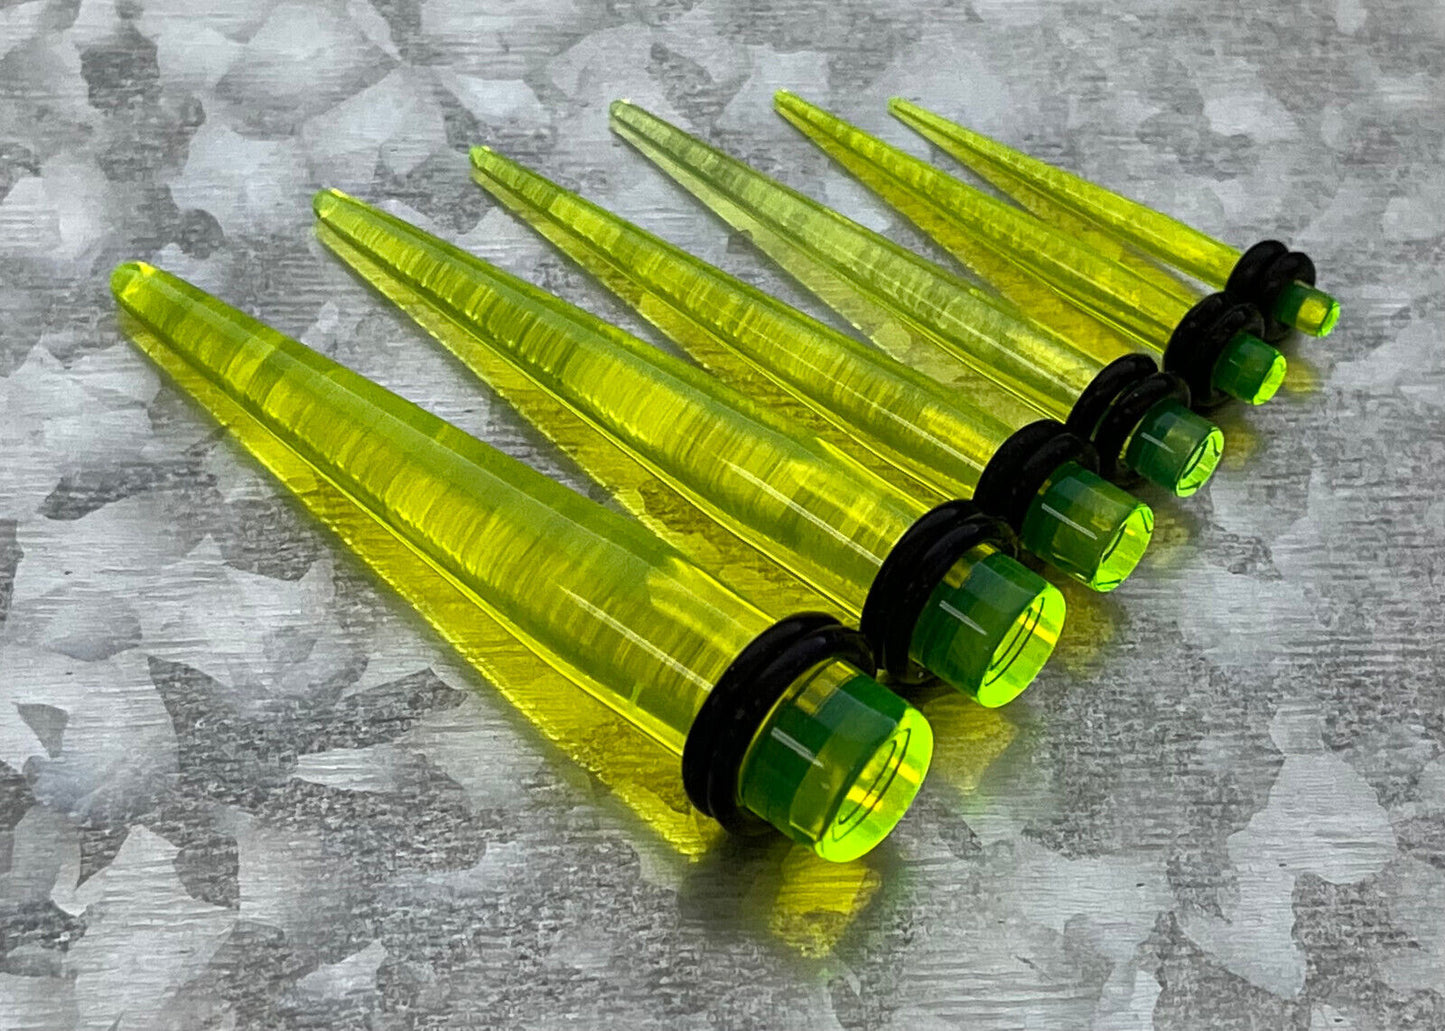 PAIR Acrylic Expansion Tapers Ear Expander Plugs Gauges 14g thru 1" available!